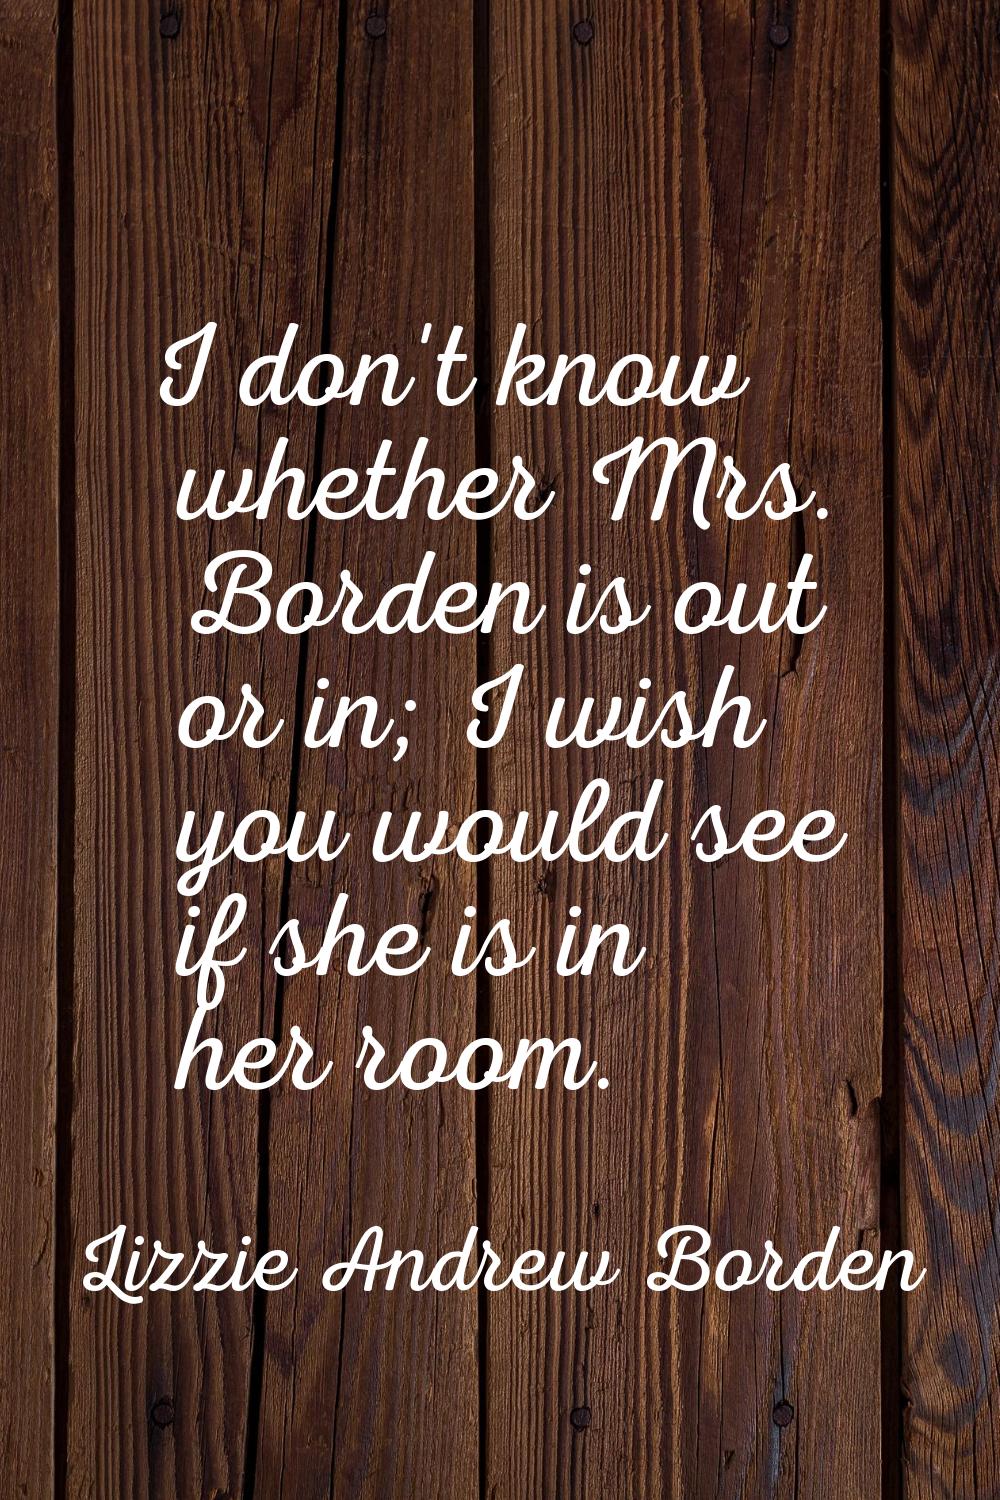 I don't know whether Mrs. Borden is out or in; I wish you would see if she is in her room.